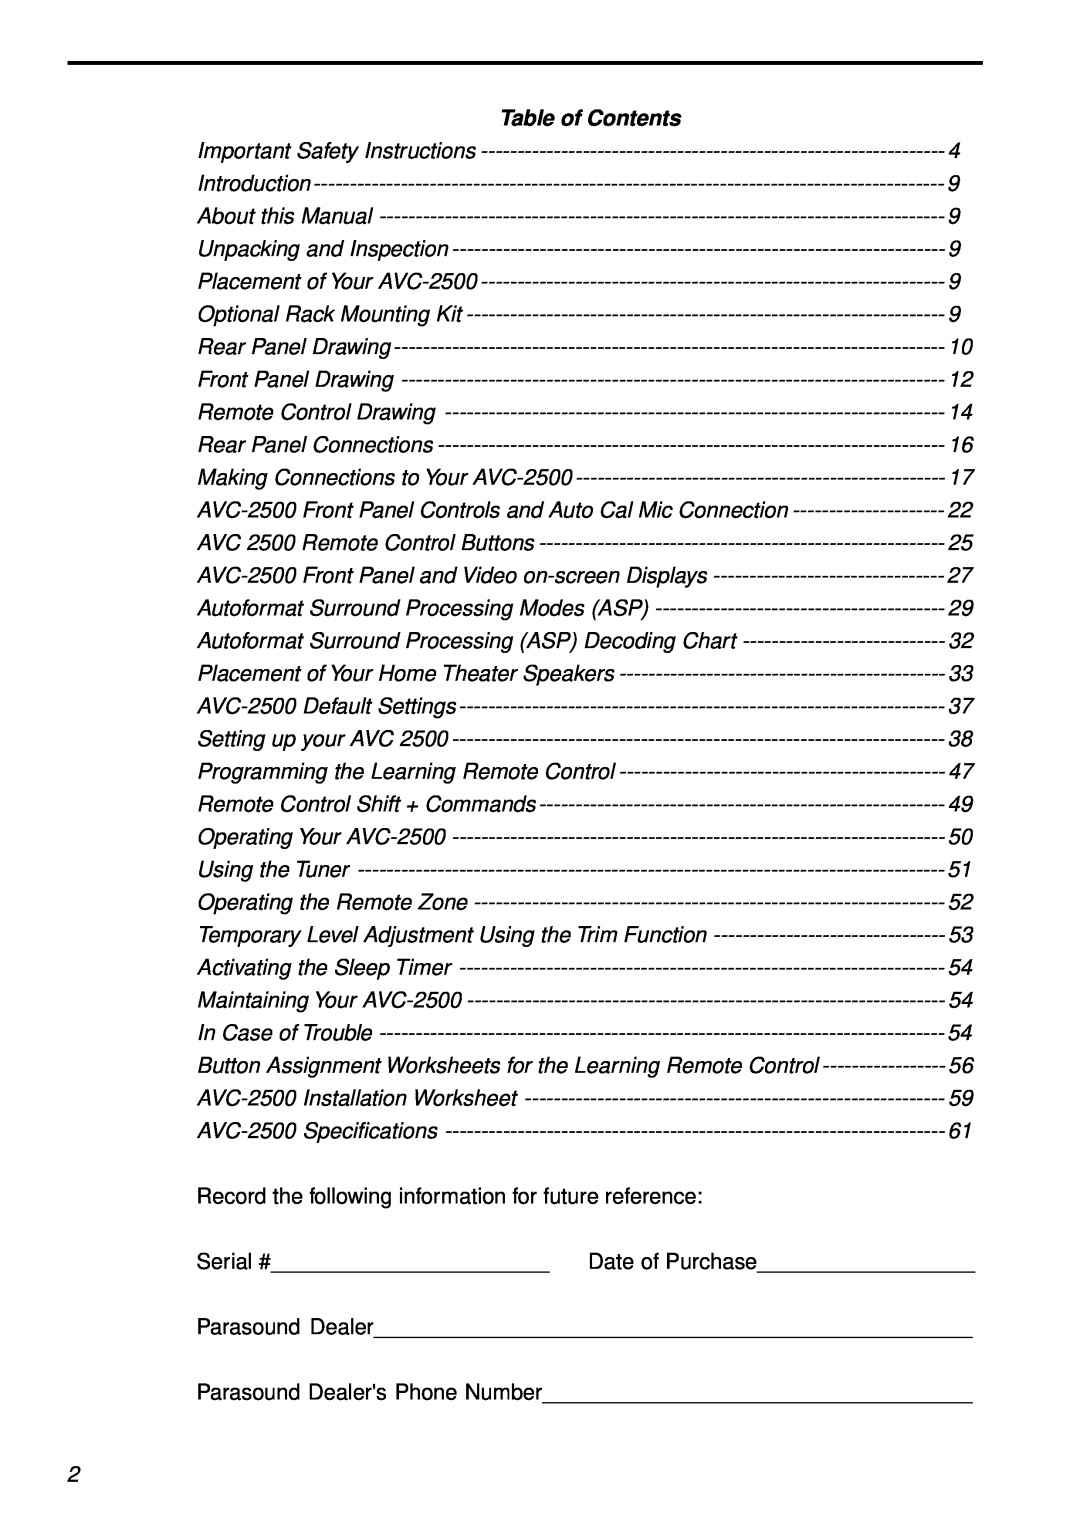 Parasound AVC-2500 owner manual Table of Contents 